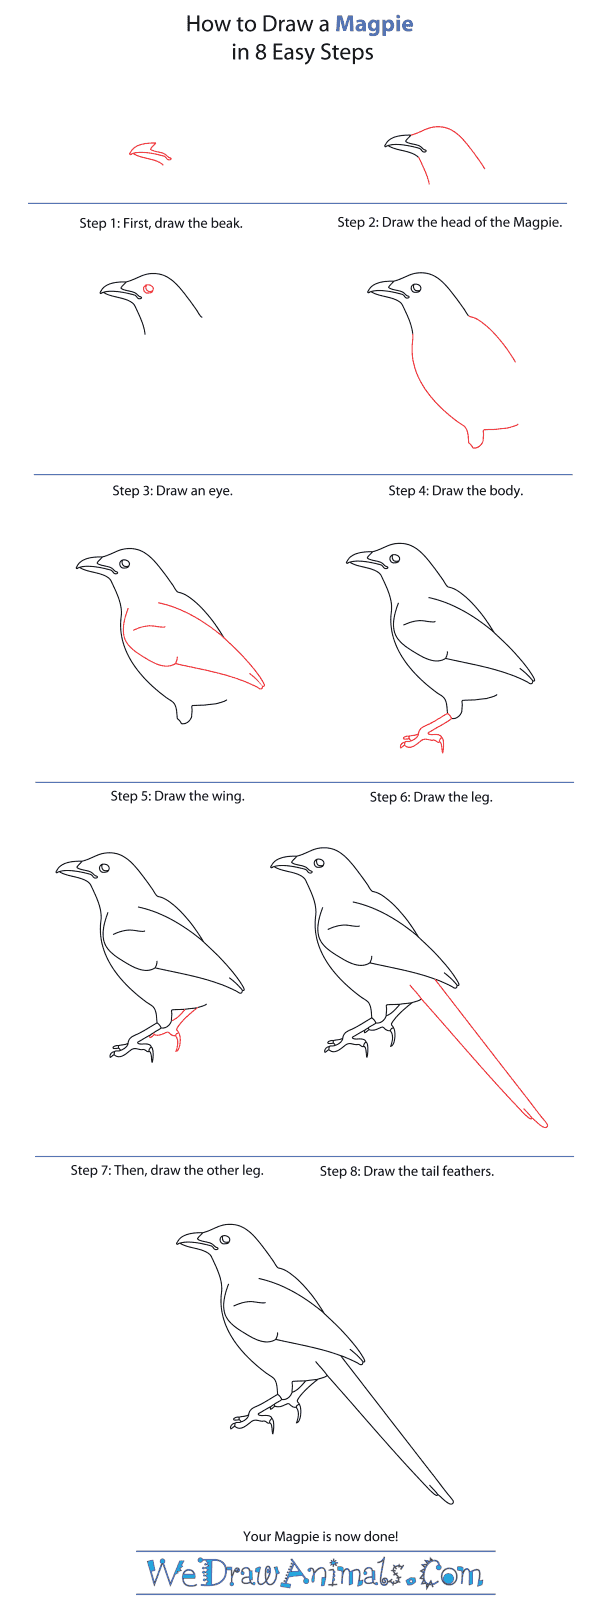 How to Draw a Magpie - Step-By-Step Tutorial